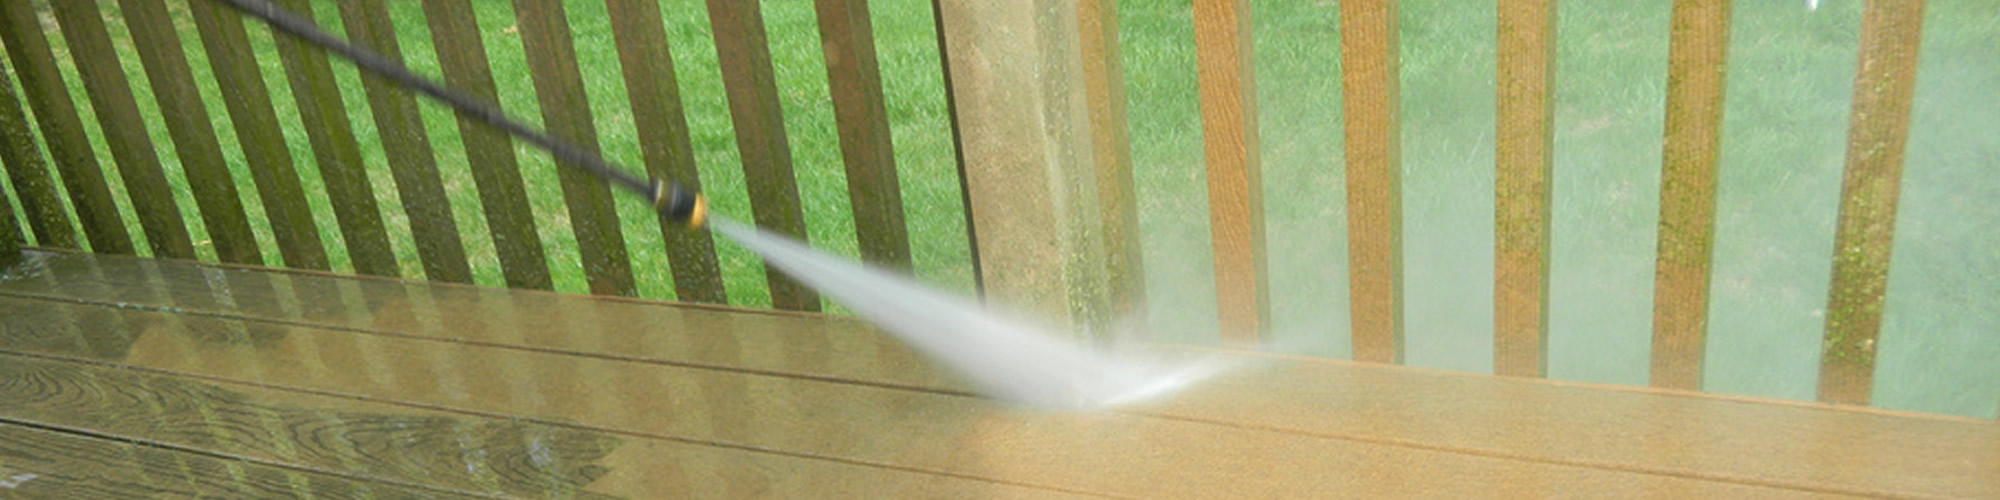 Power Washing Services Wales Wisconsin